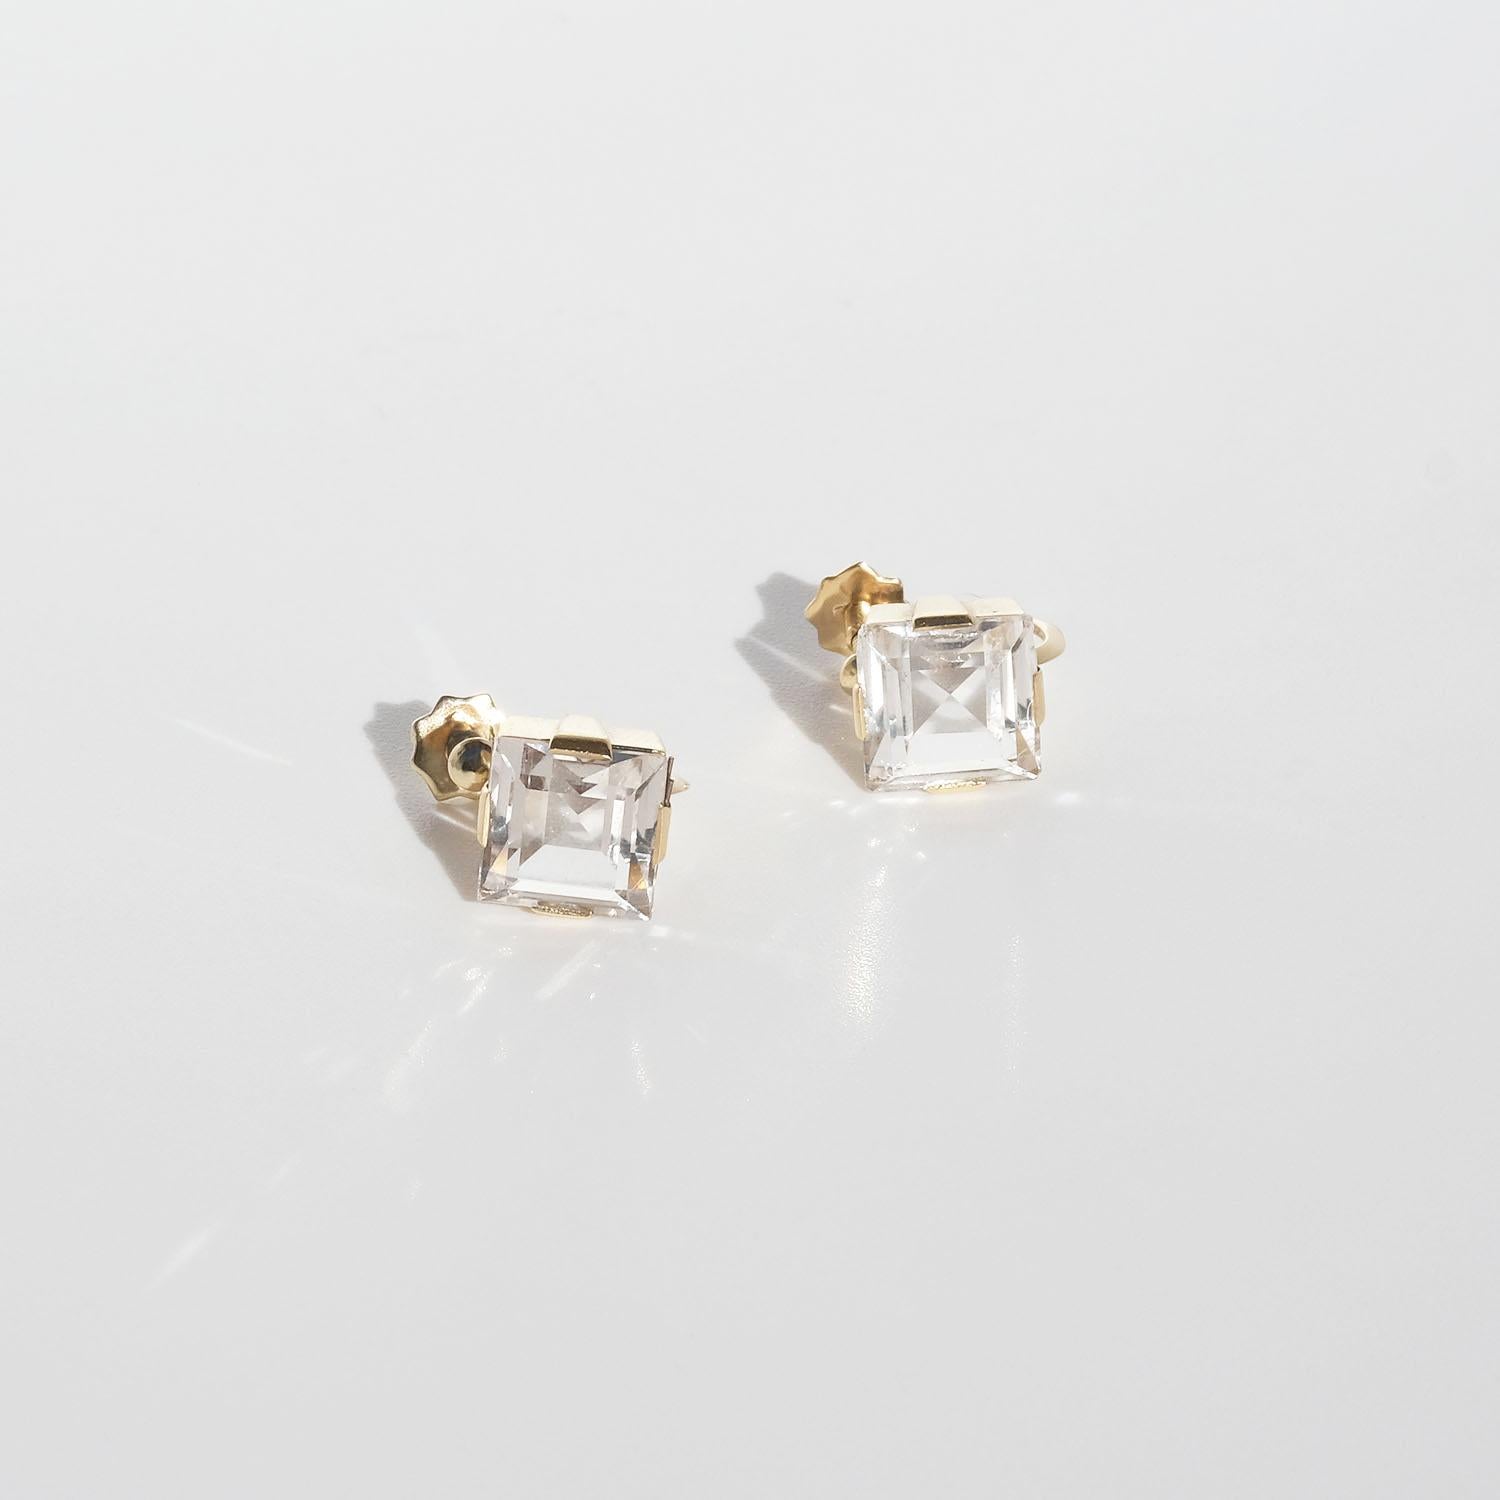 These earrings are made of 18 karat gold and feature square, carré-cut rock crystals that have a clear and bright appearance. The design is elegant, with the gold forming a geometric setting around the crystals, giving a vintage feel. They are